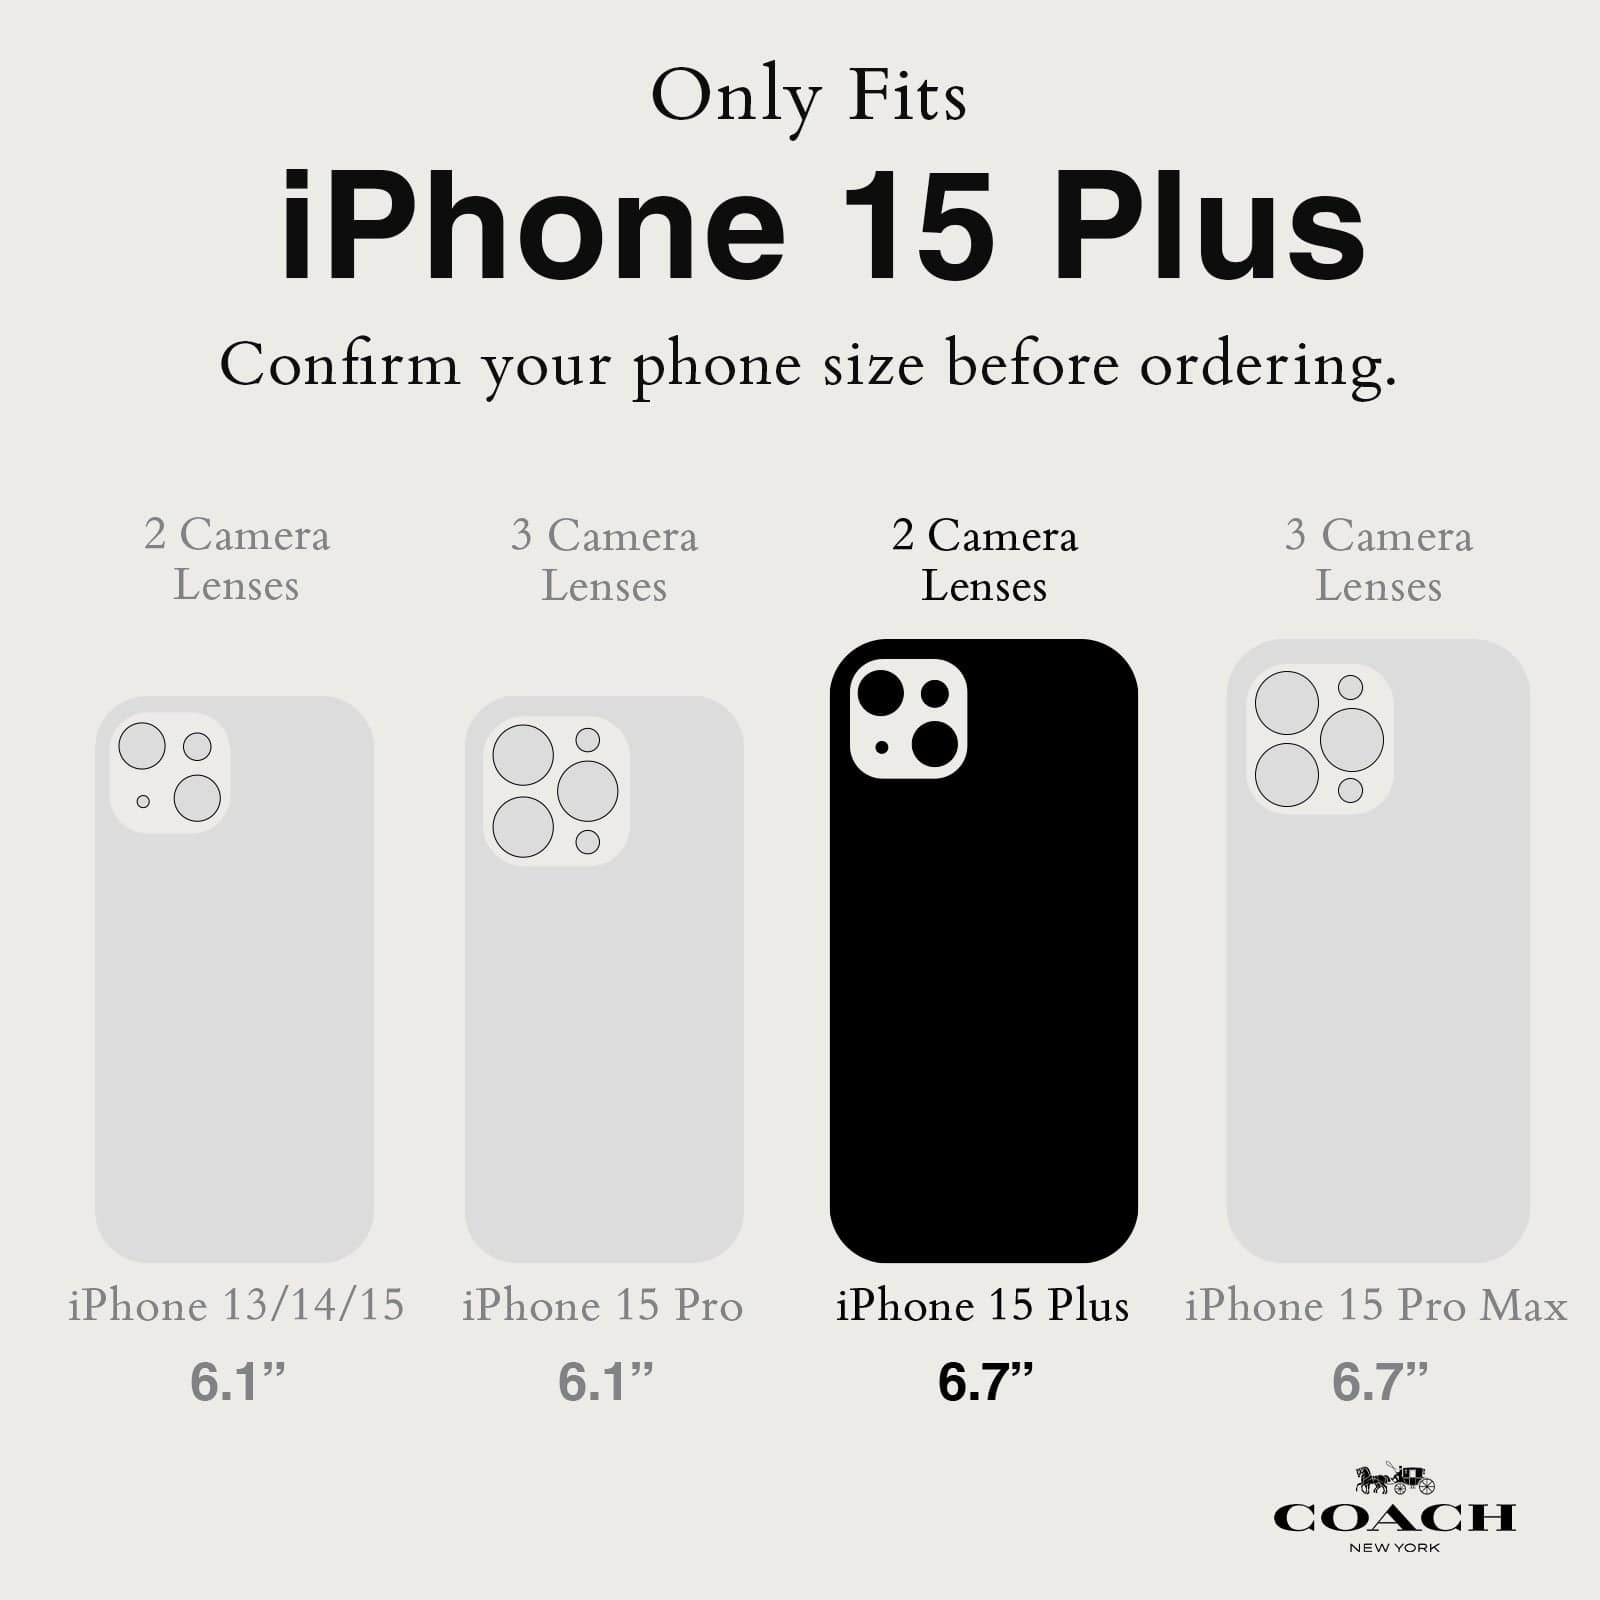 ONYL FITS IPHONE 15 PLUS. CONFIRM YOUR PHONE SIZE BEFORE ORDERING.